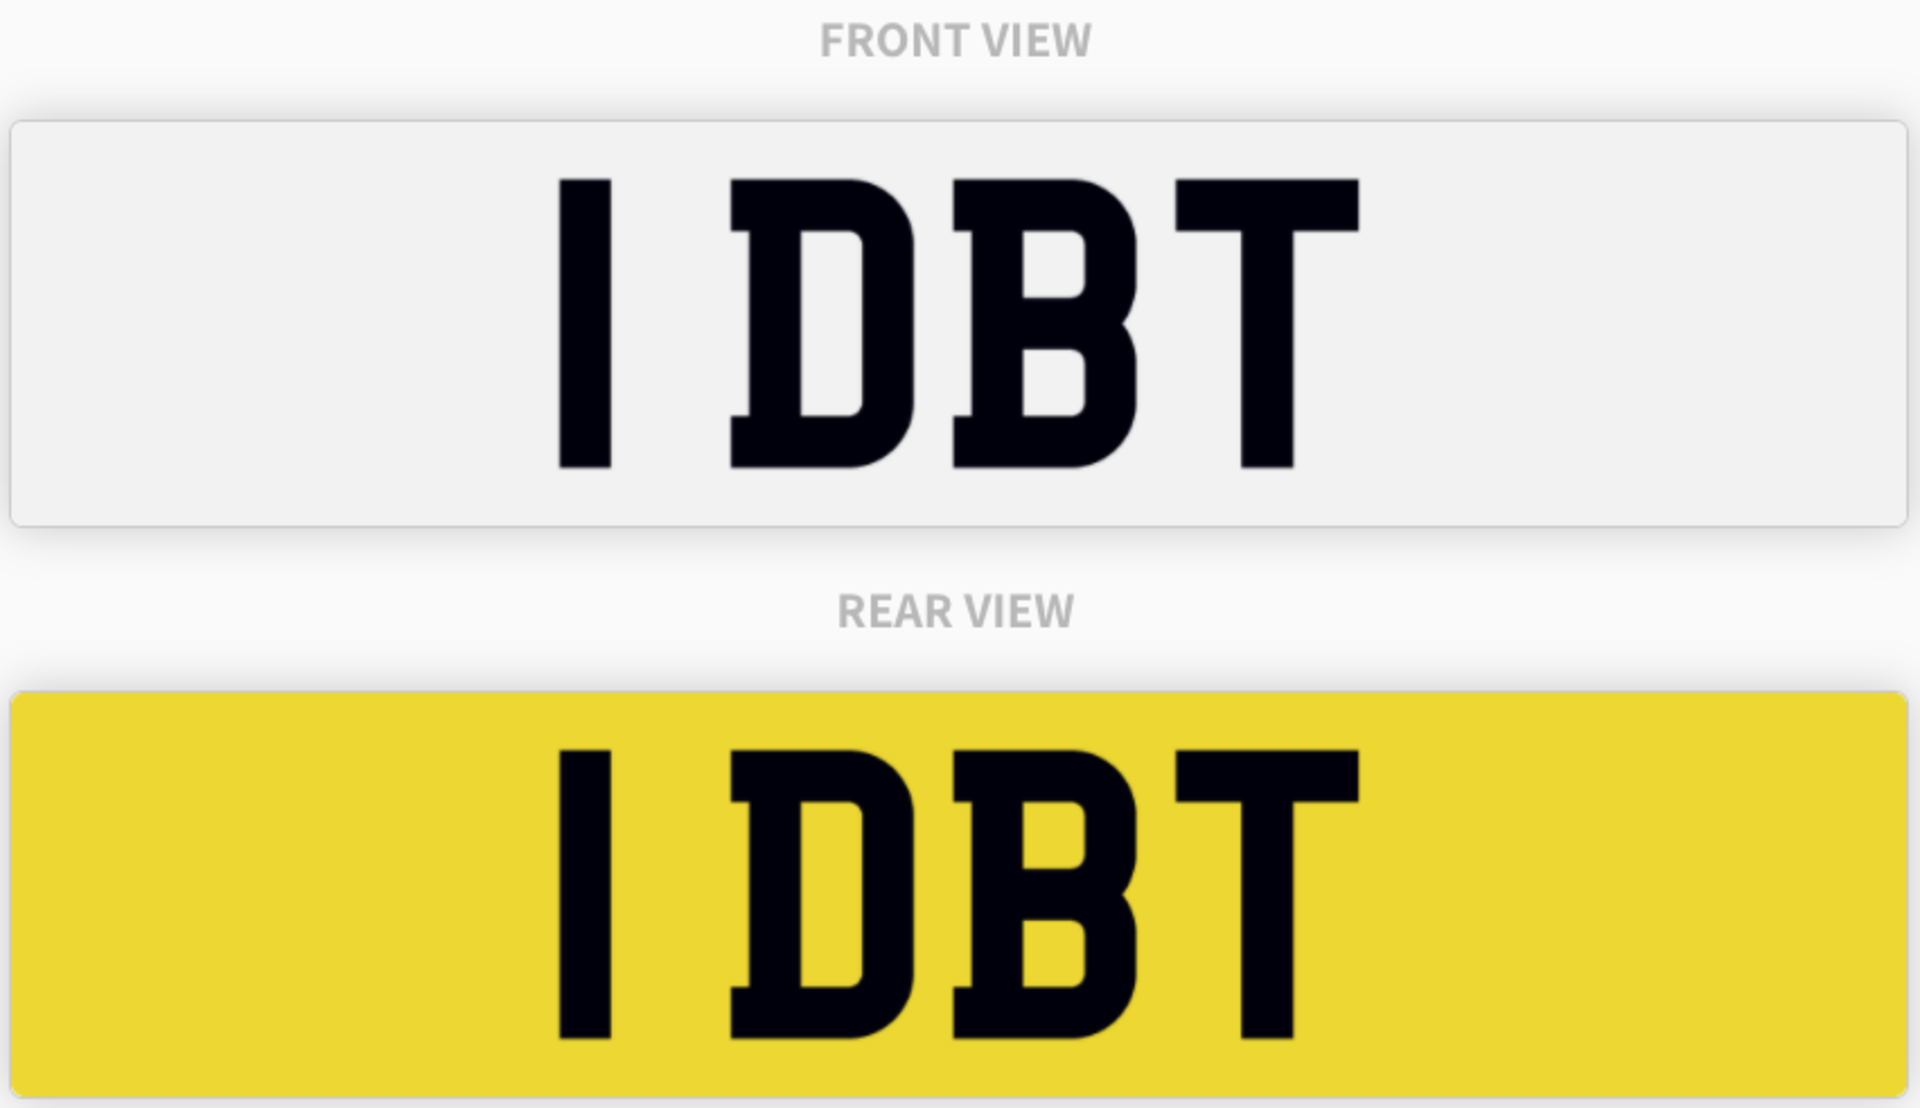 1 DBT , number plate on retention